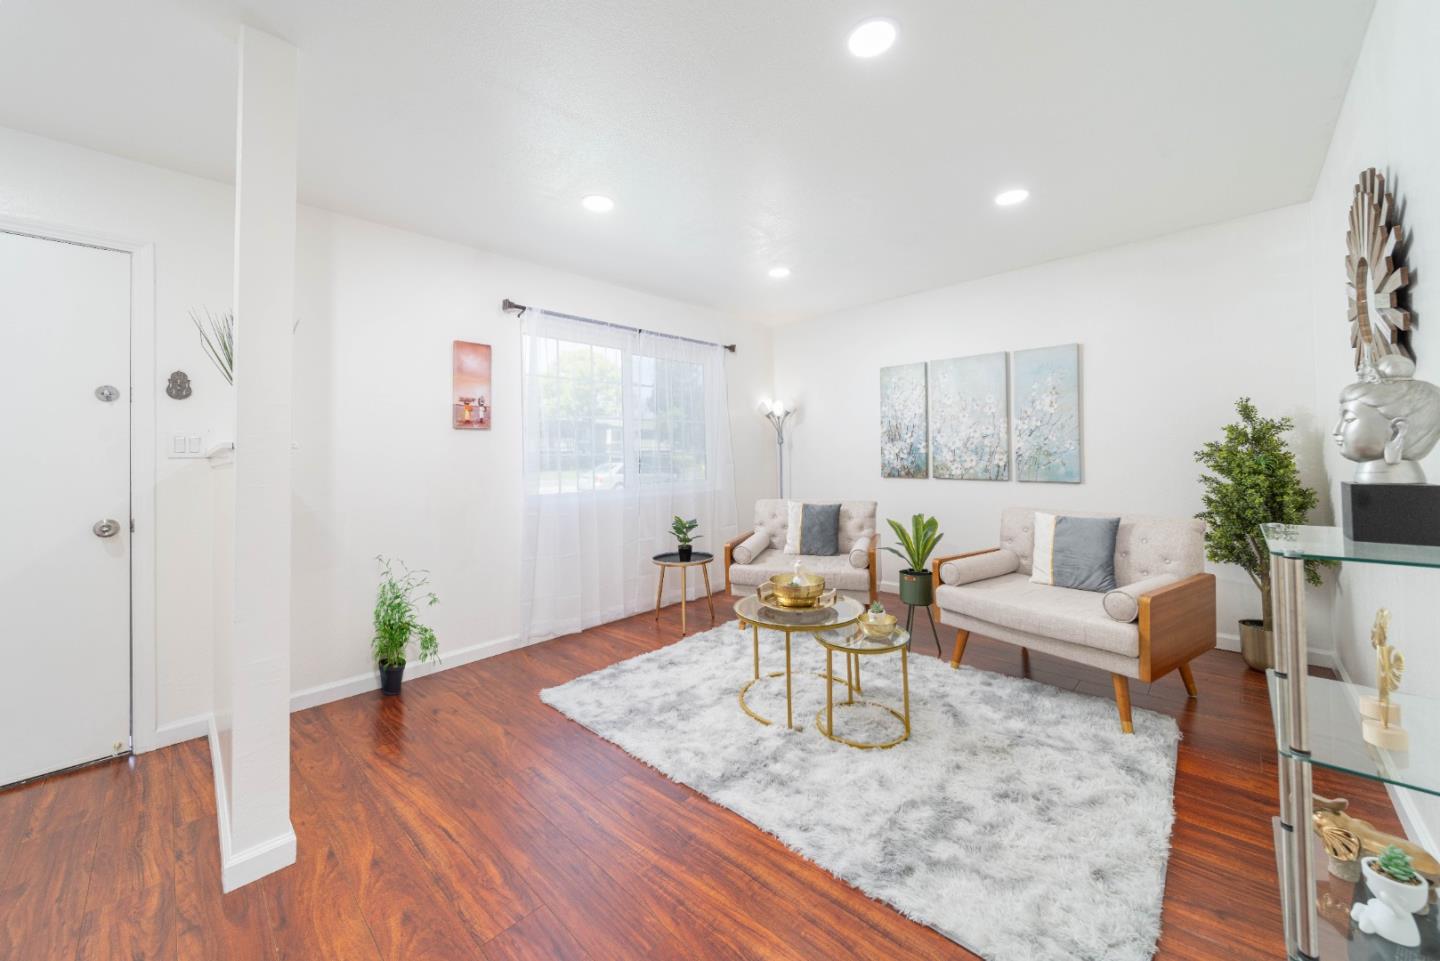 Photo of 4510 Thornton Ave #3 in Fremont, CA